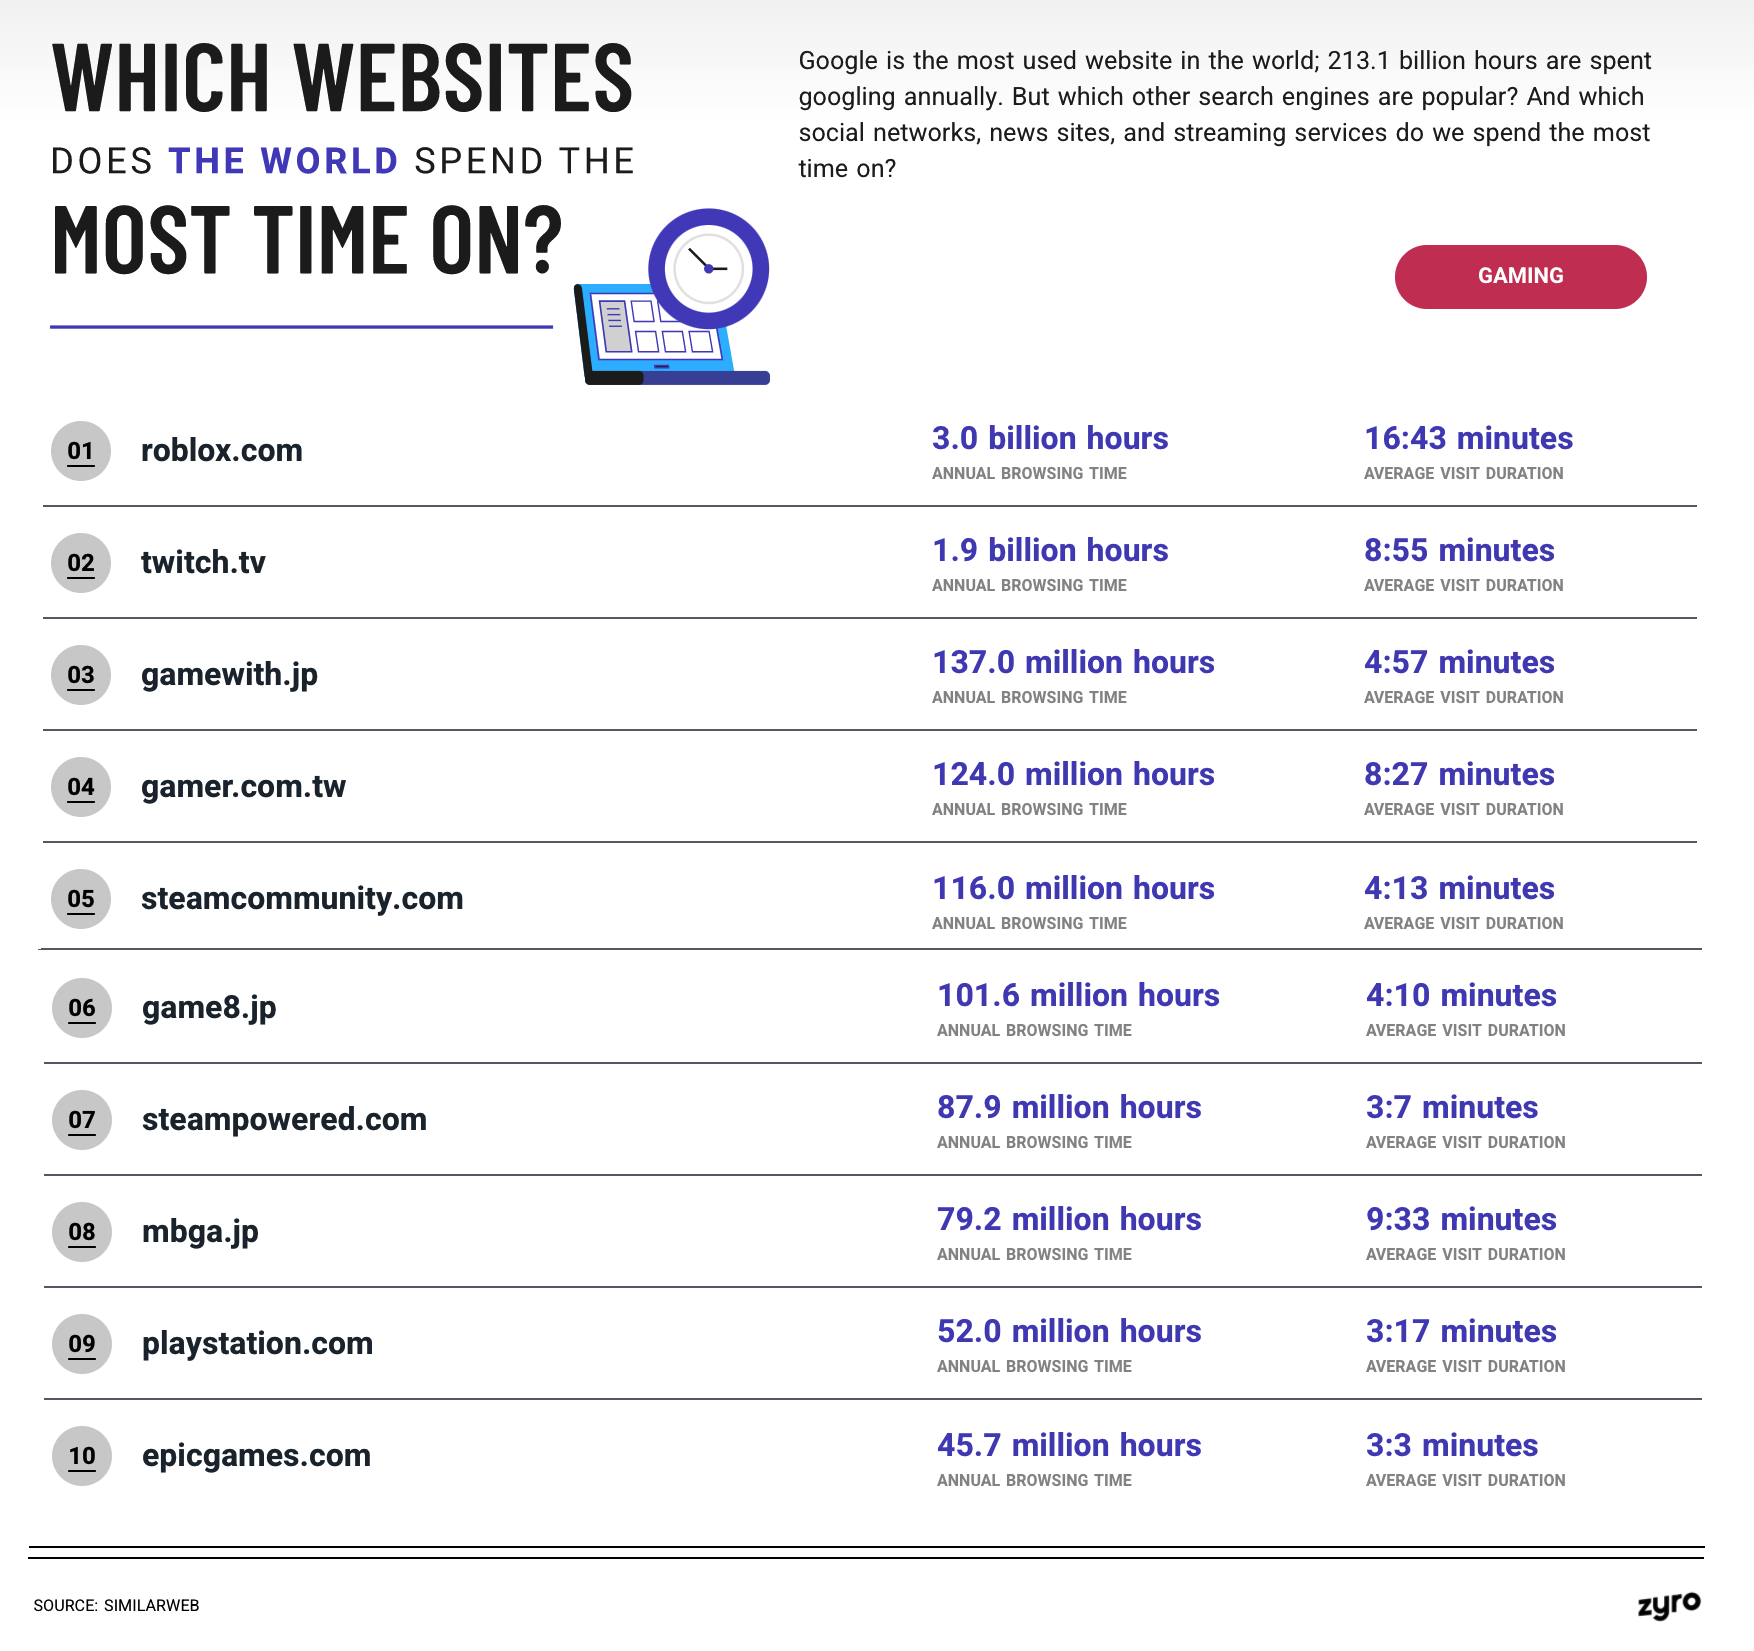 Which Gaming Websites Does the World Spend the Most Time On?